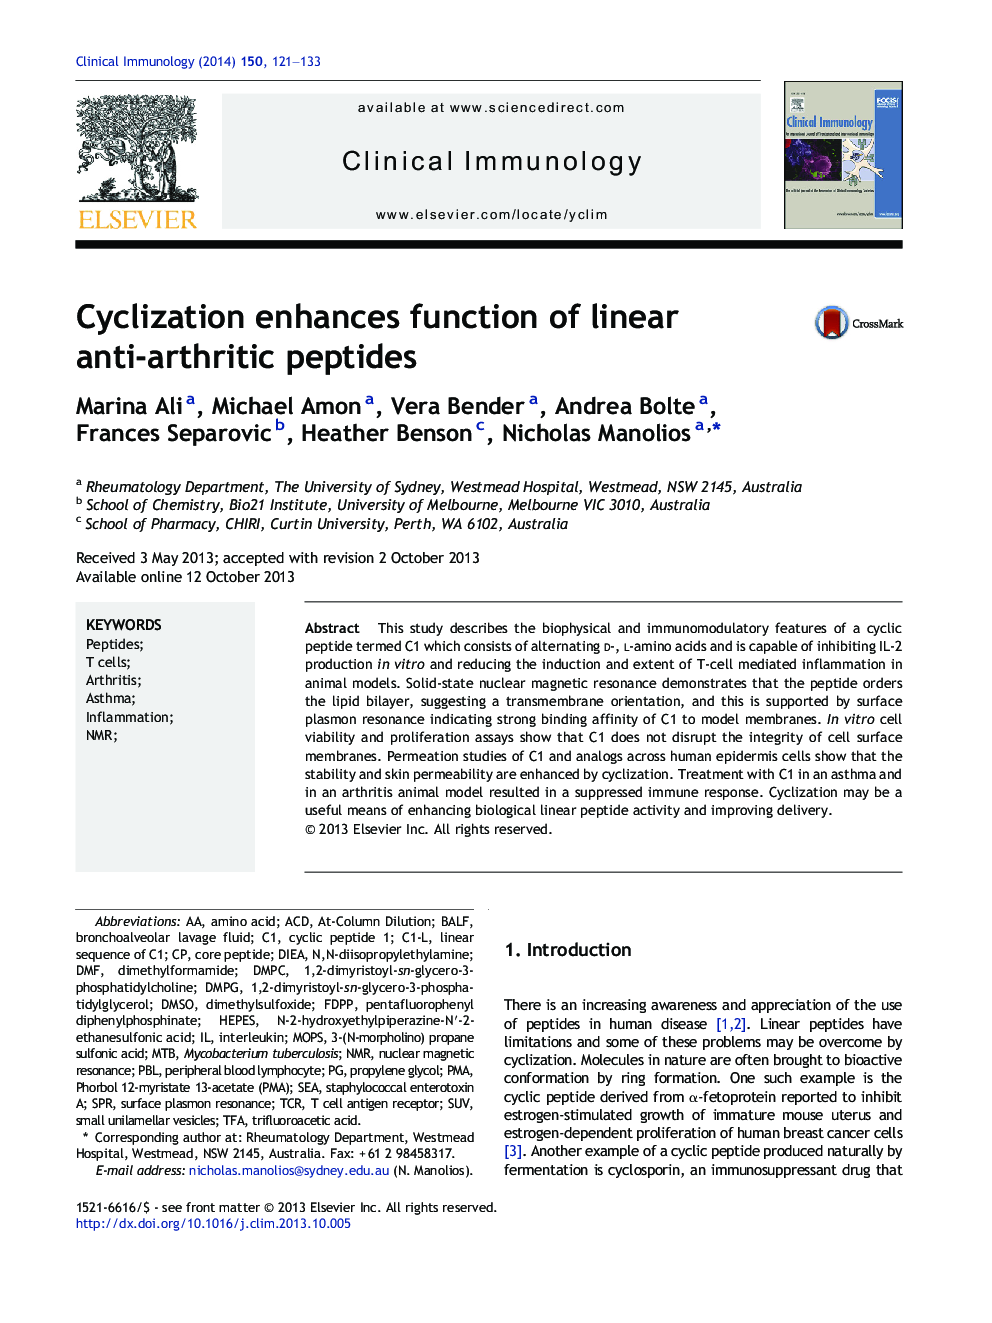 Cyclization enhances function of linear anti-arthritic peptides